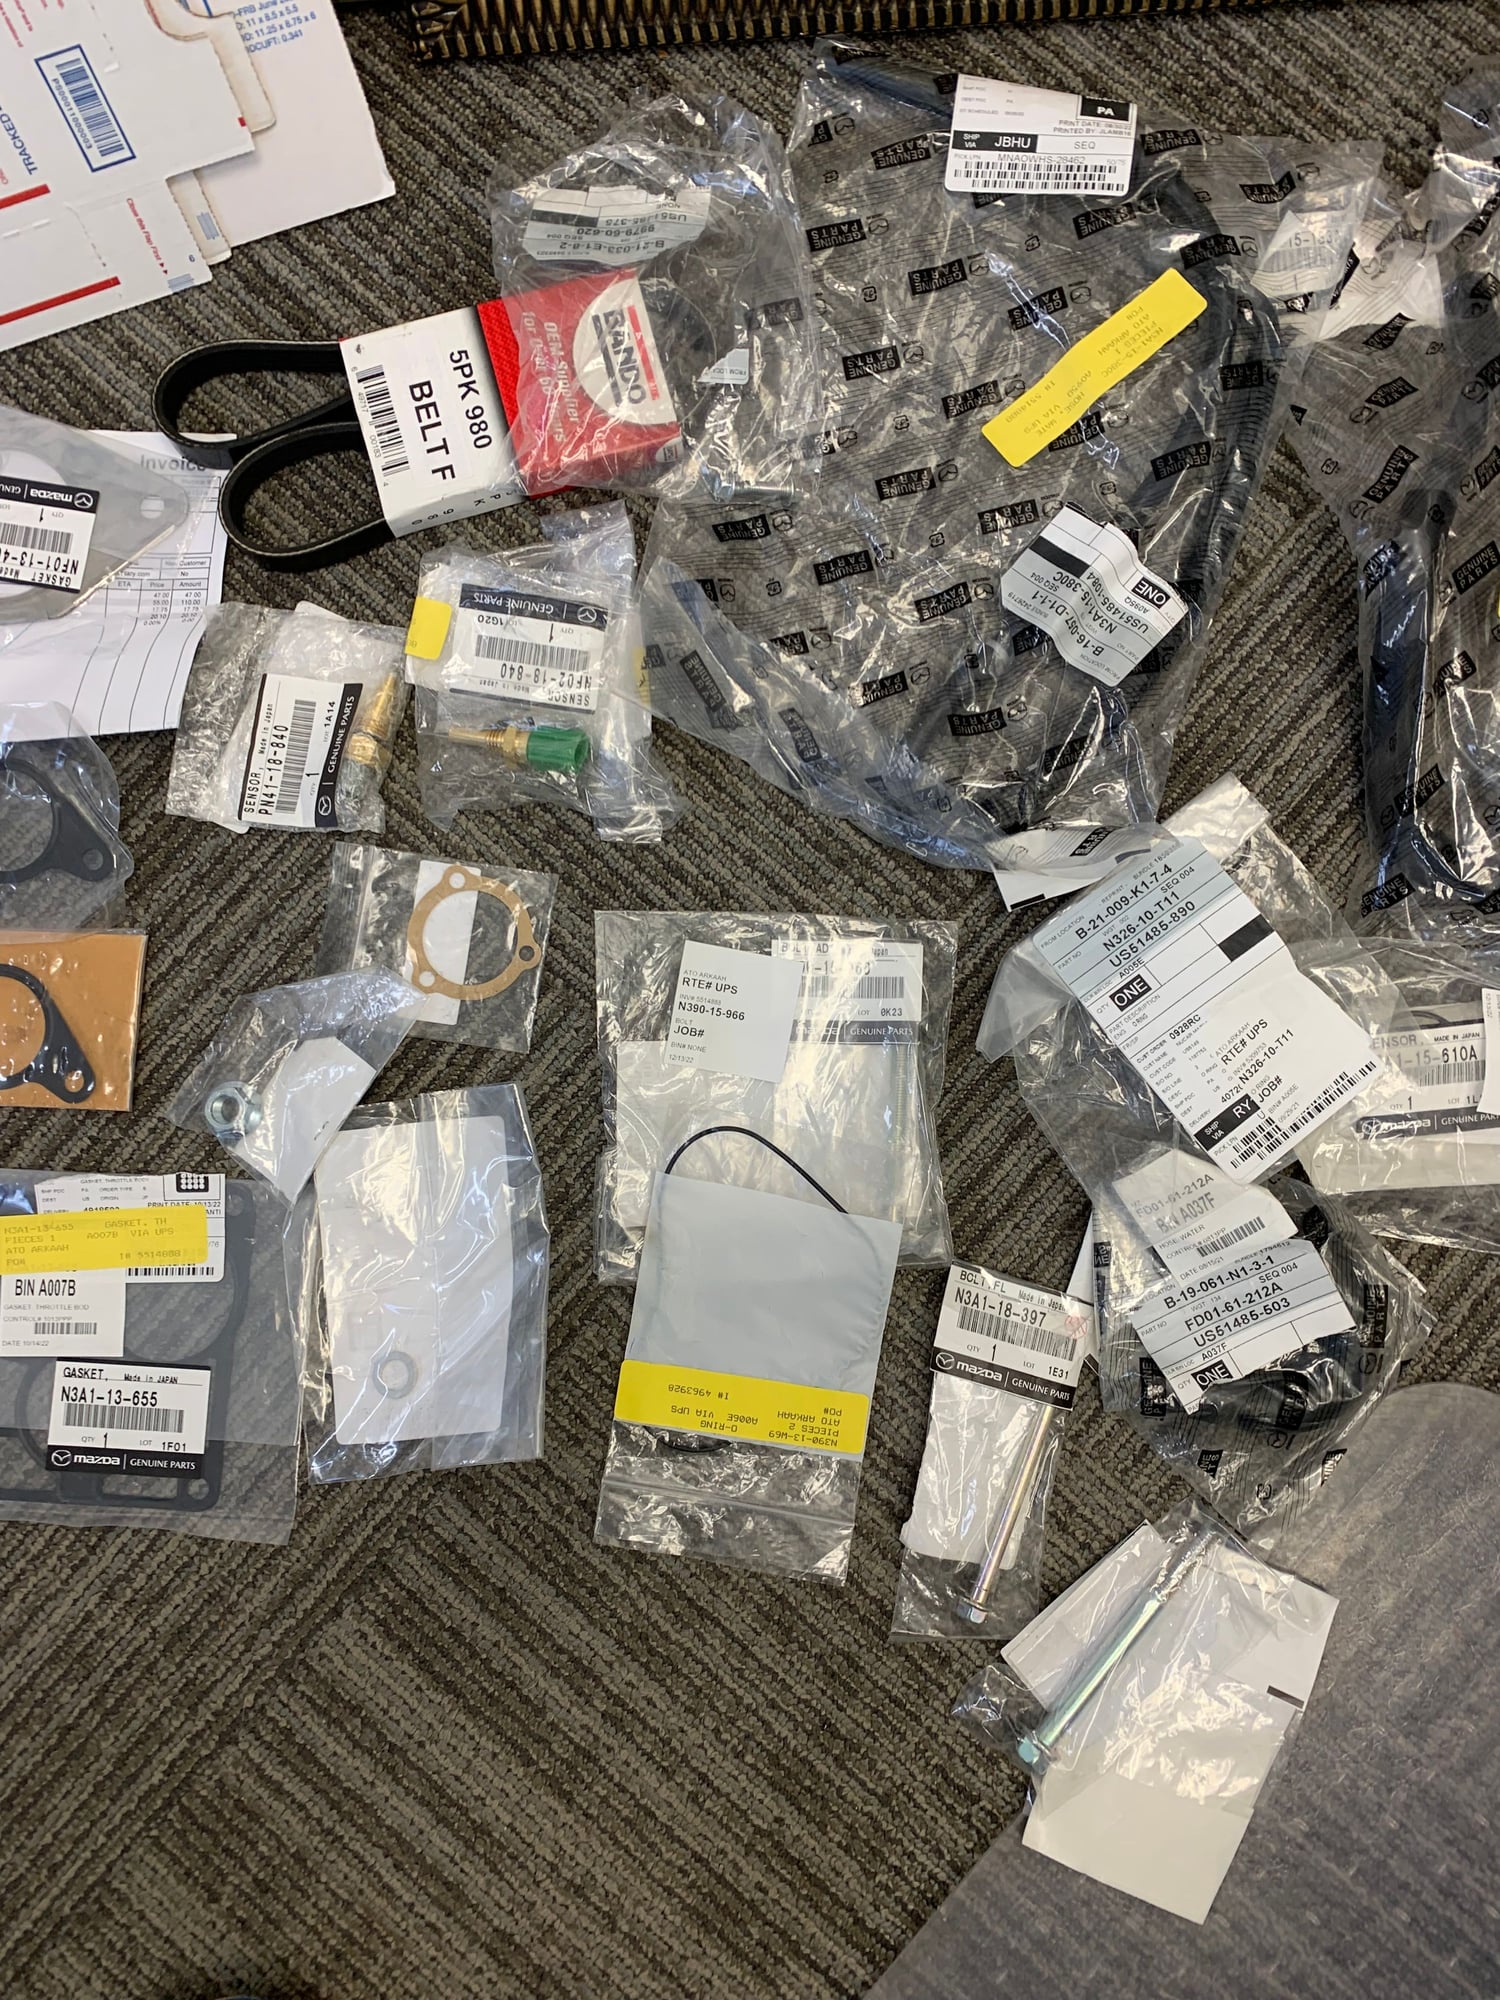 Miscellaneous - RX7 FD3S - Large Lot of Rebuild Parts/Hoses/Sensors/Gaskets (BNIB) - New - 1993 to 2002 Mazda RX-7 - Breinigsville, PA 18031, United States